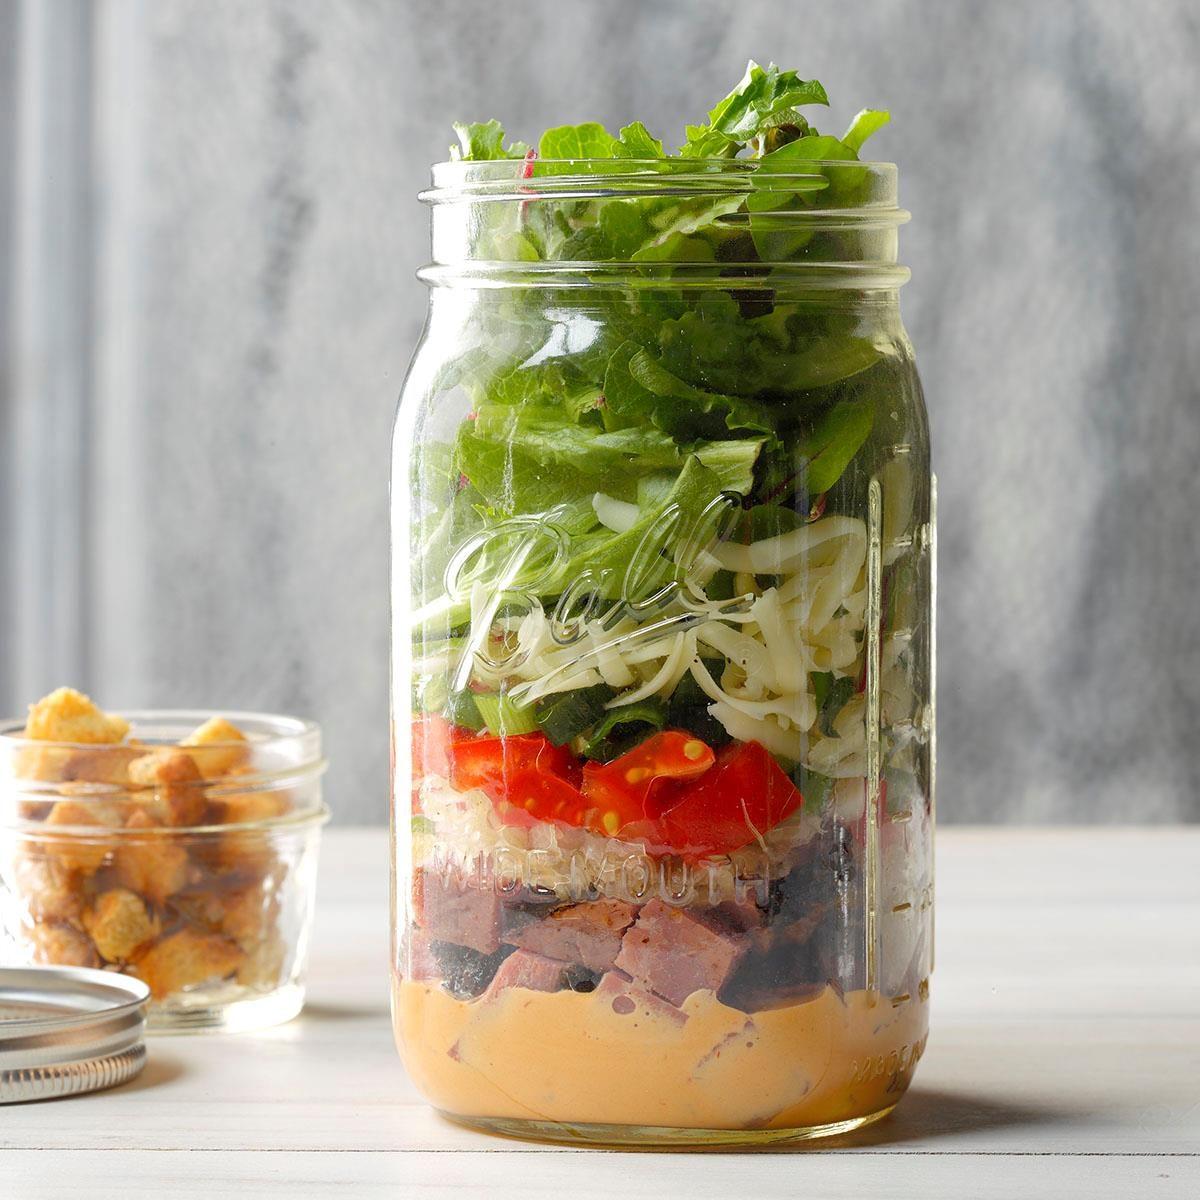 How to Make a Salad in a Jar